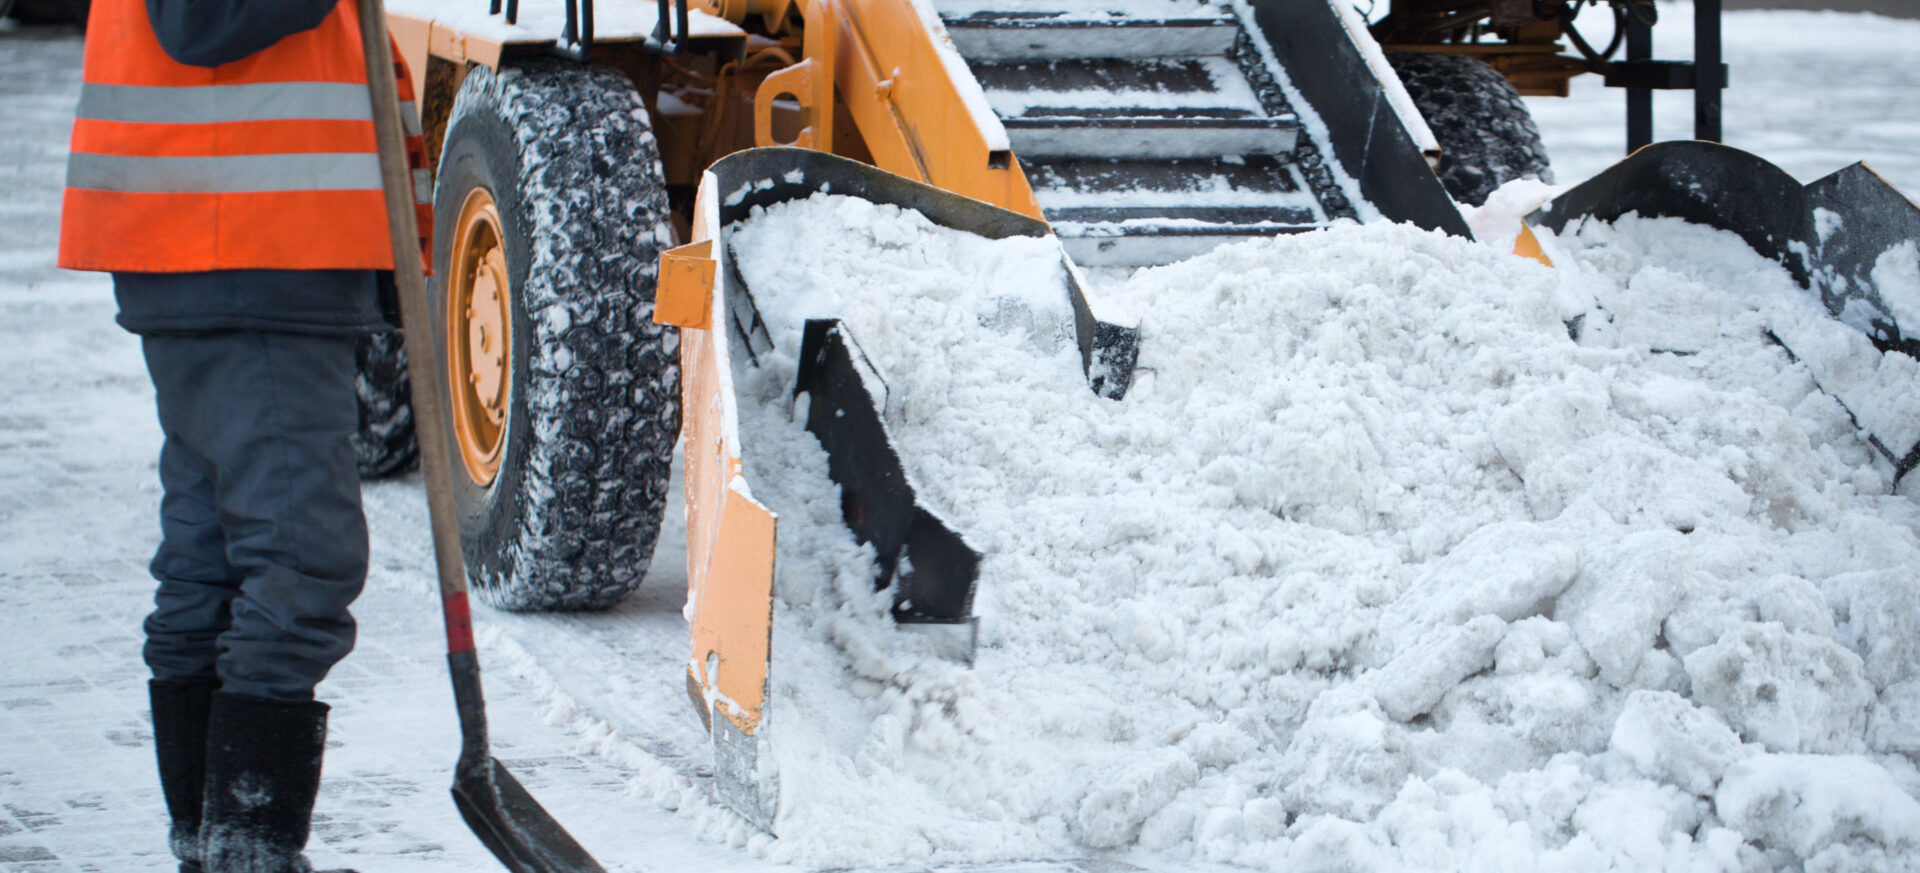 Guide to Finding & Hiring Snow Removal Professionals in My Area